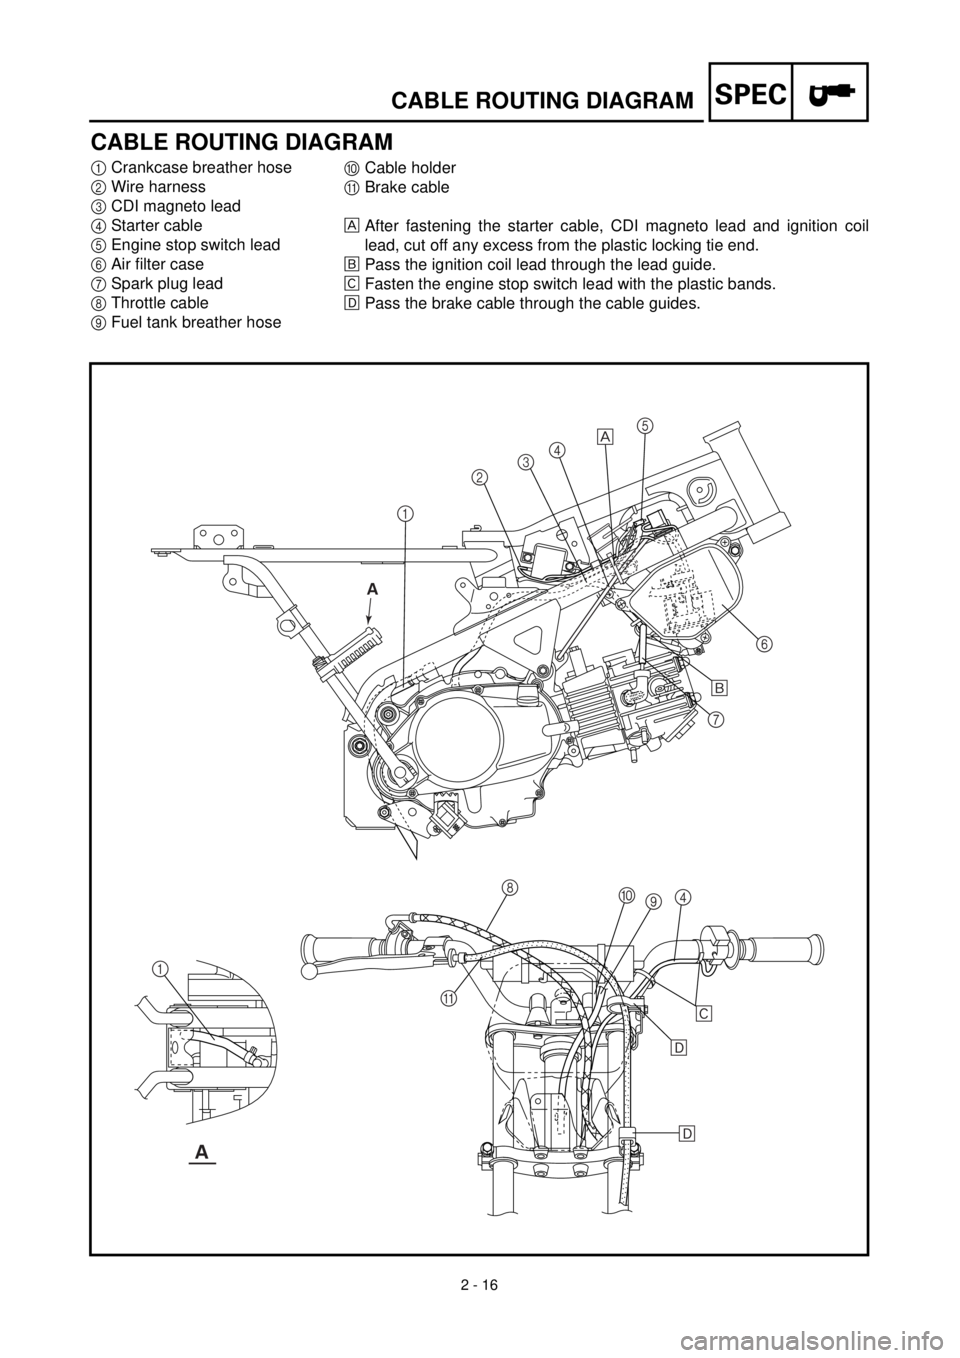 YAMAHA TTR90 2000  Owners Manual  
2 - 16
SPEC
 
CABLE ROUTING DIAGRAM
CABLE ROUTING DIAGRAM 
1 
Crankcase breather hose 
2 
Wire harness 
3 
CDI magneto lead 
4 
Starter cable 
5 
Engine stop switch lead 
6 
Air filter case 
7 
Spar